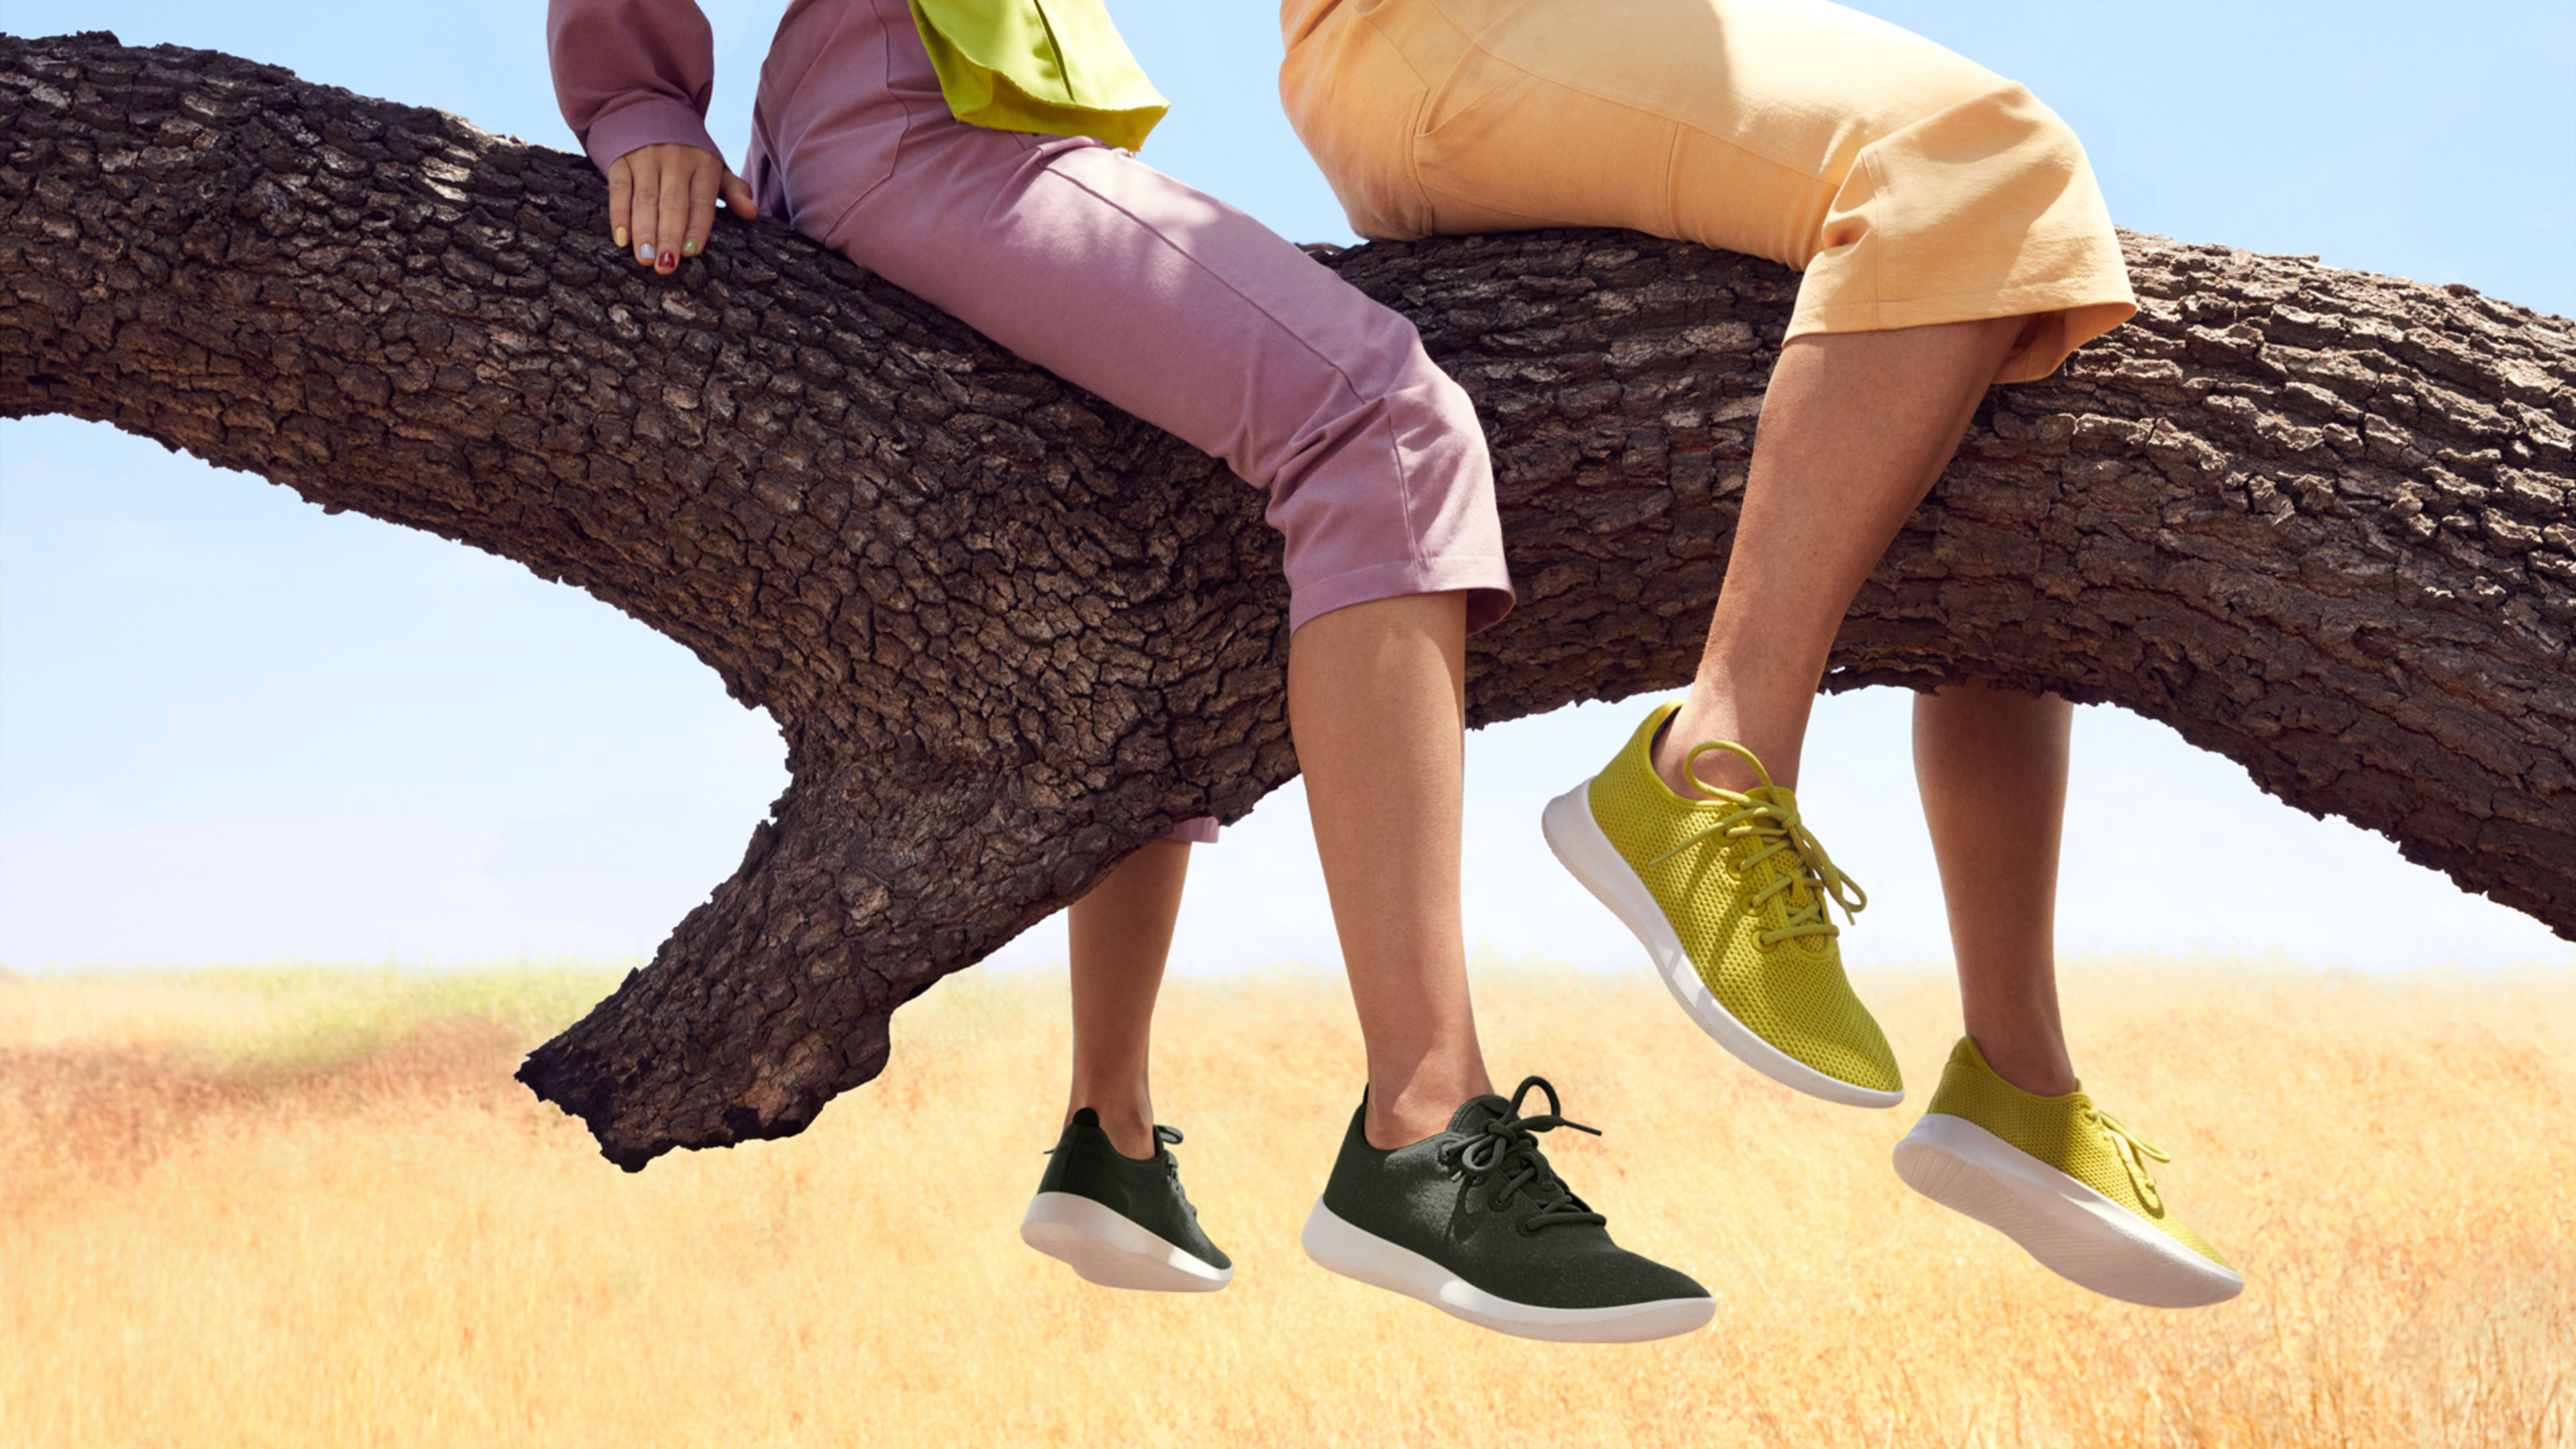 Exclusive: Allbirds is charting a climate-positive roadmap that other brands can follow